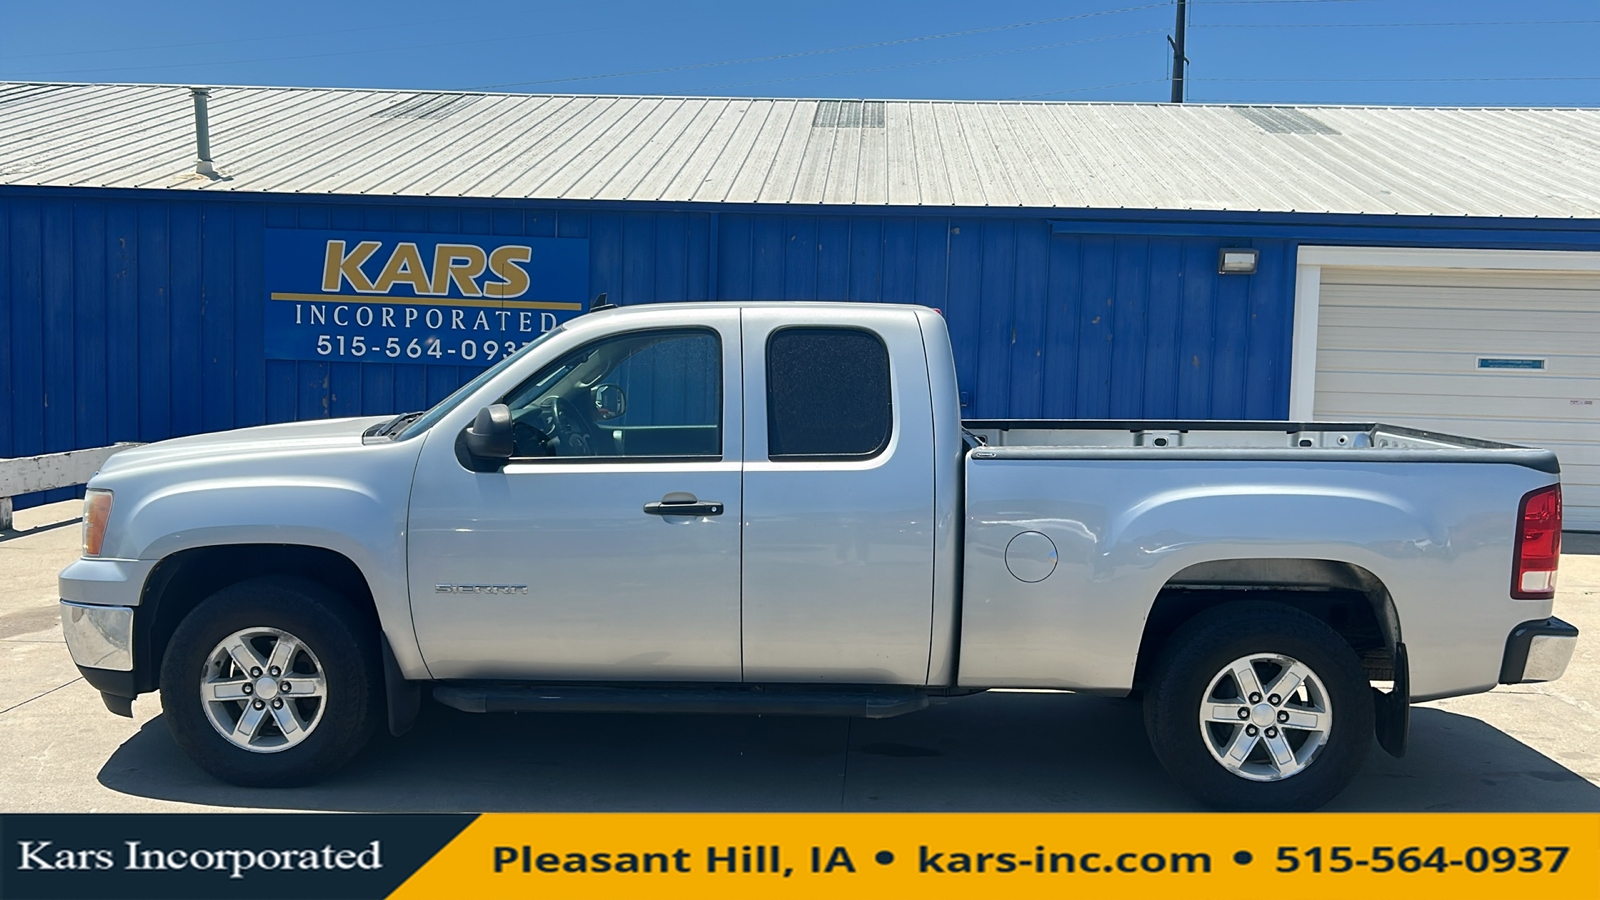 2011 GMC Sierra 1500 1500 SLE 4WD Extended Cab  - B84553P  - Kars Incorporated